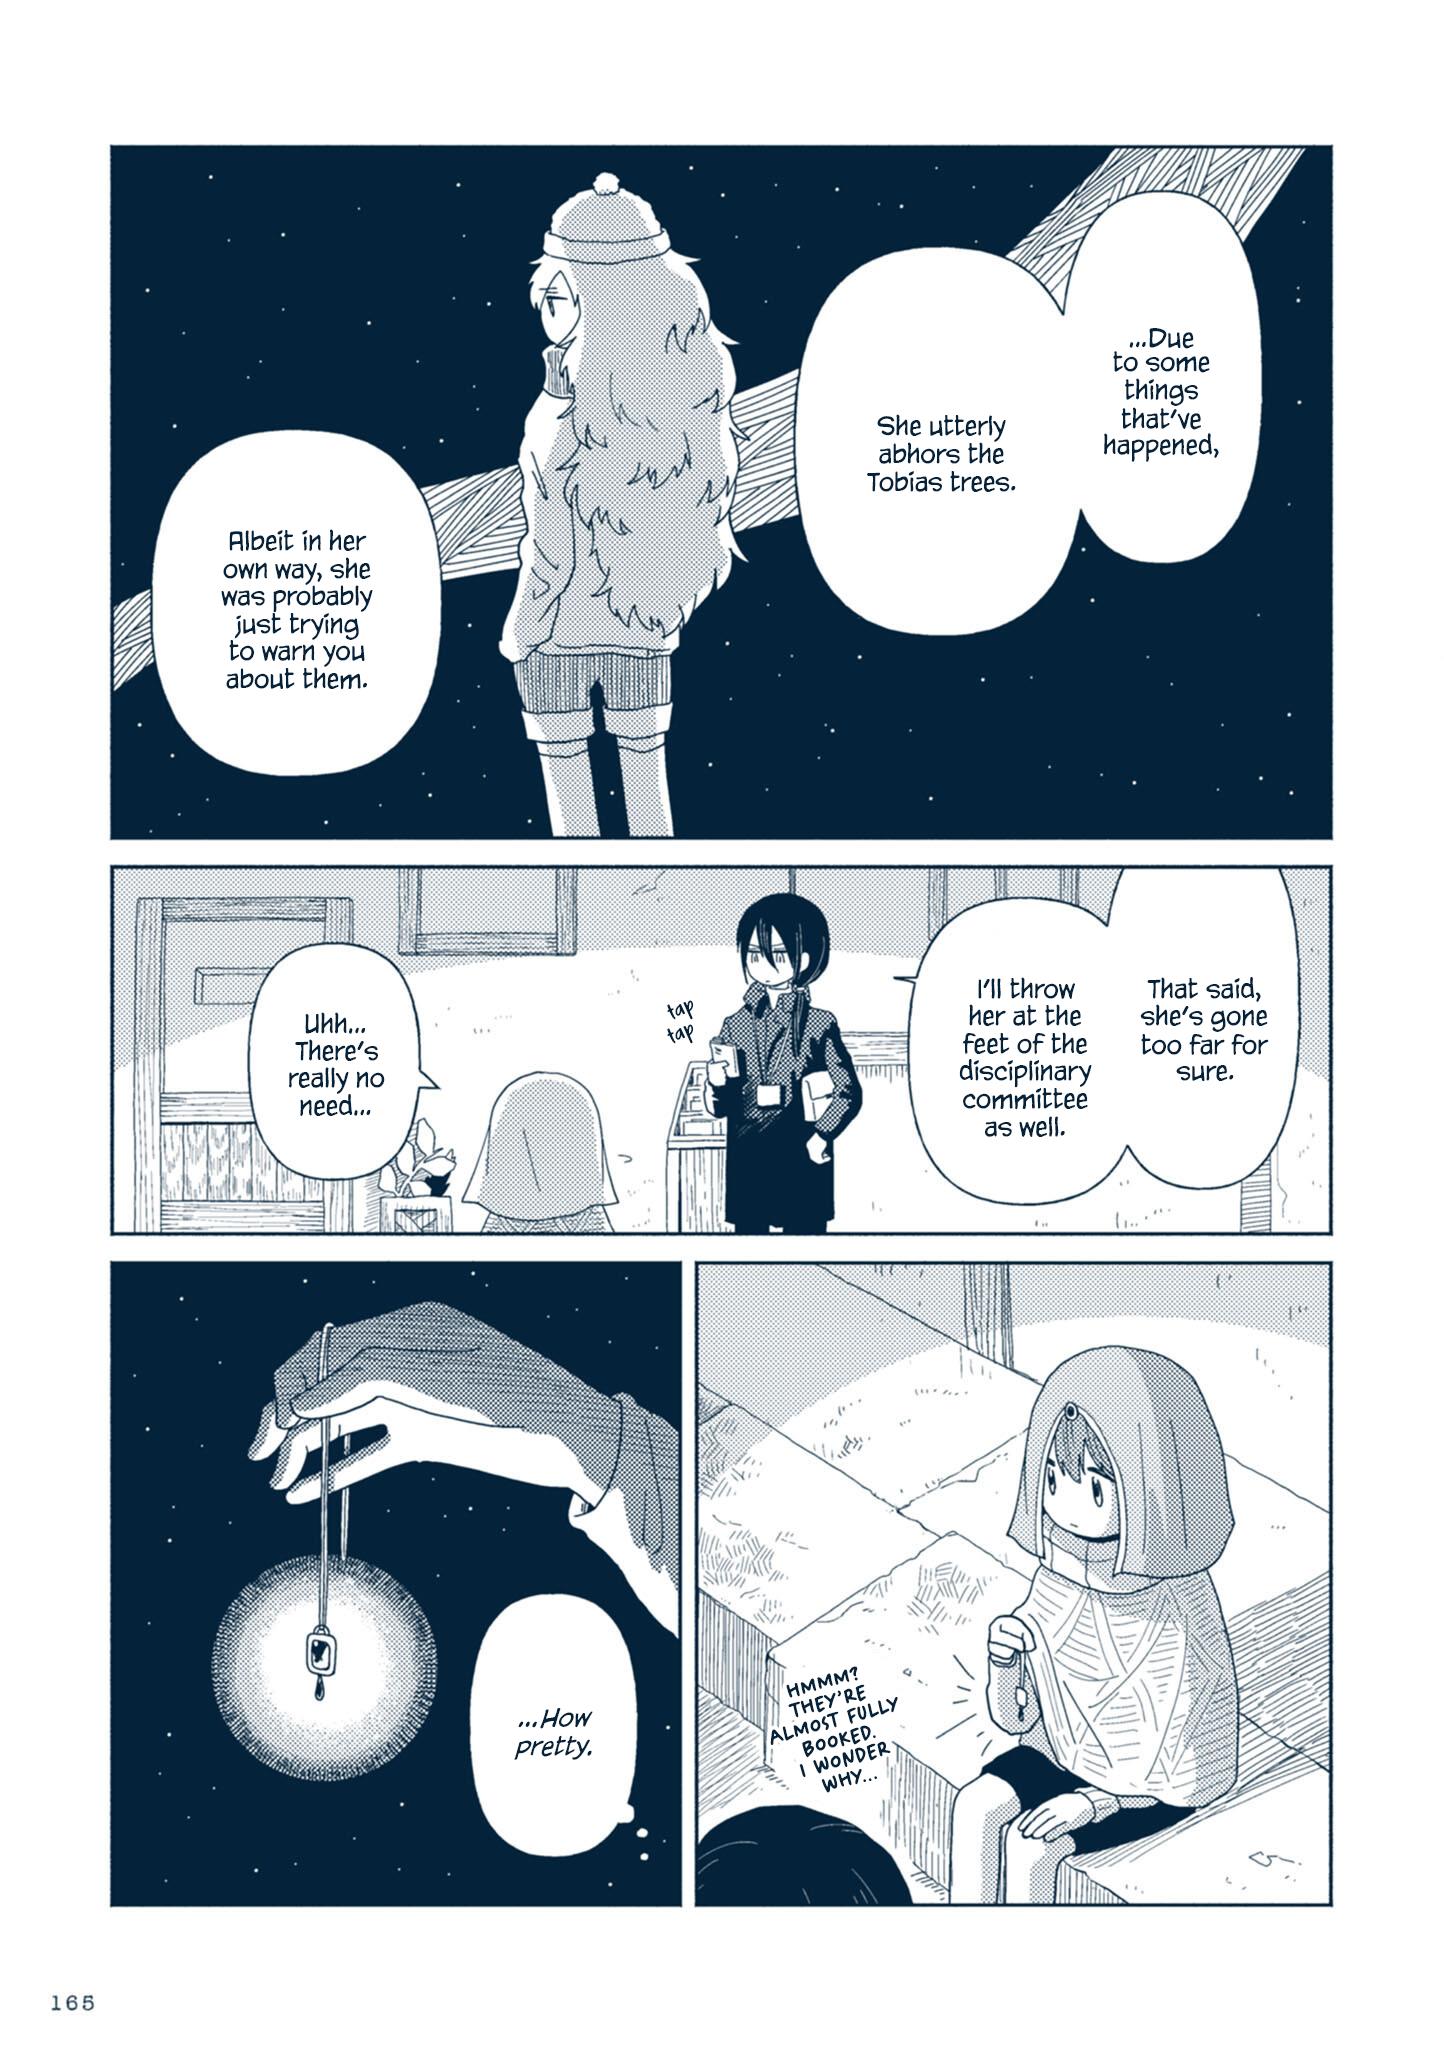 Star Tripper: Planetarium Ghost Travel Vol.1 Chapter 4.5: Slumbering Hotel (Part Two) - Picture 2